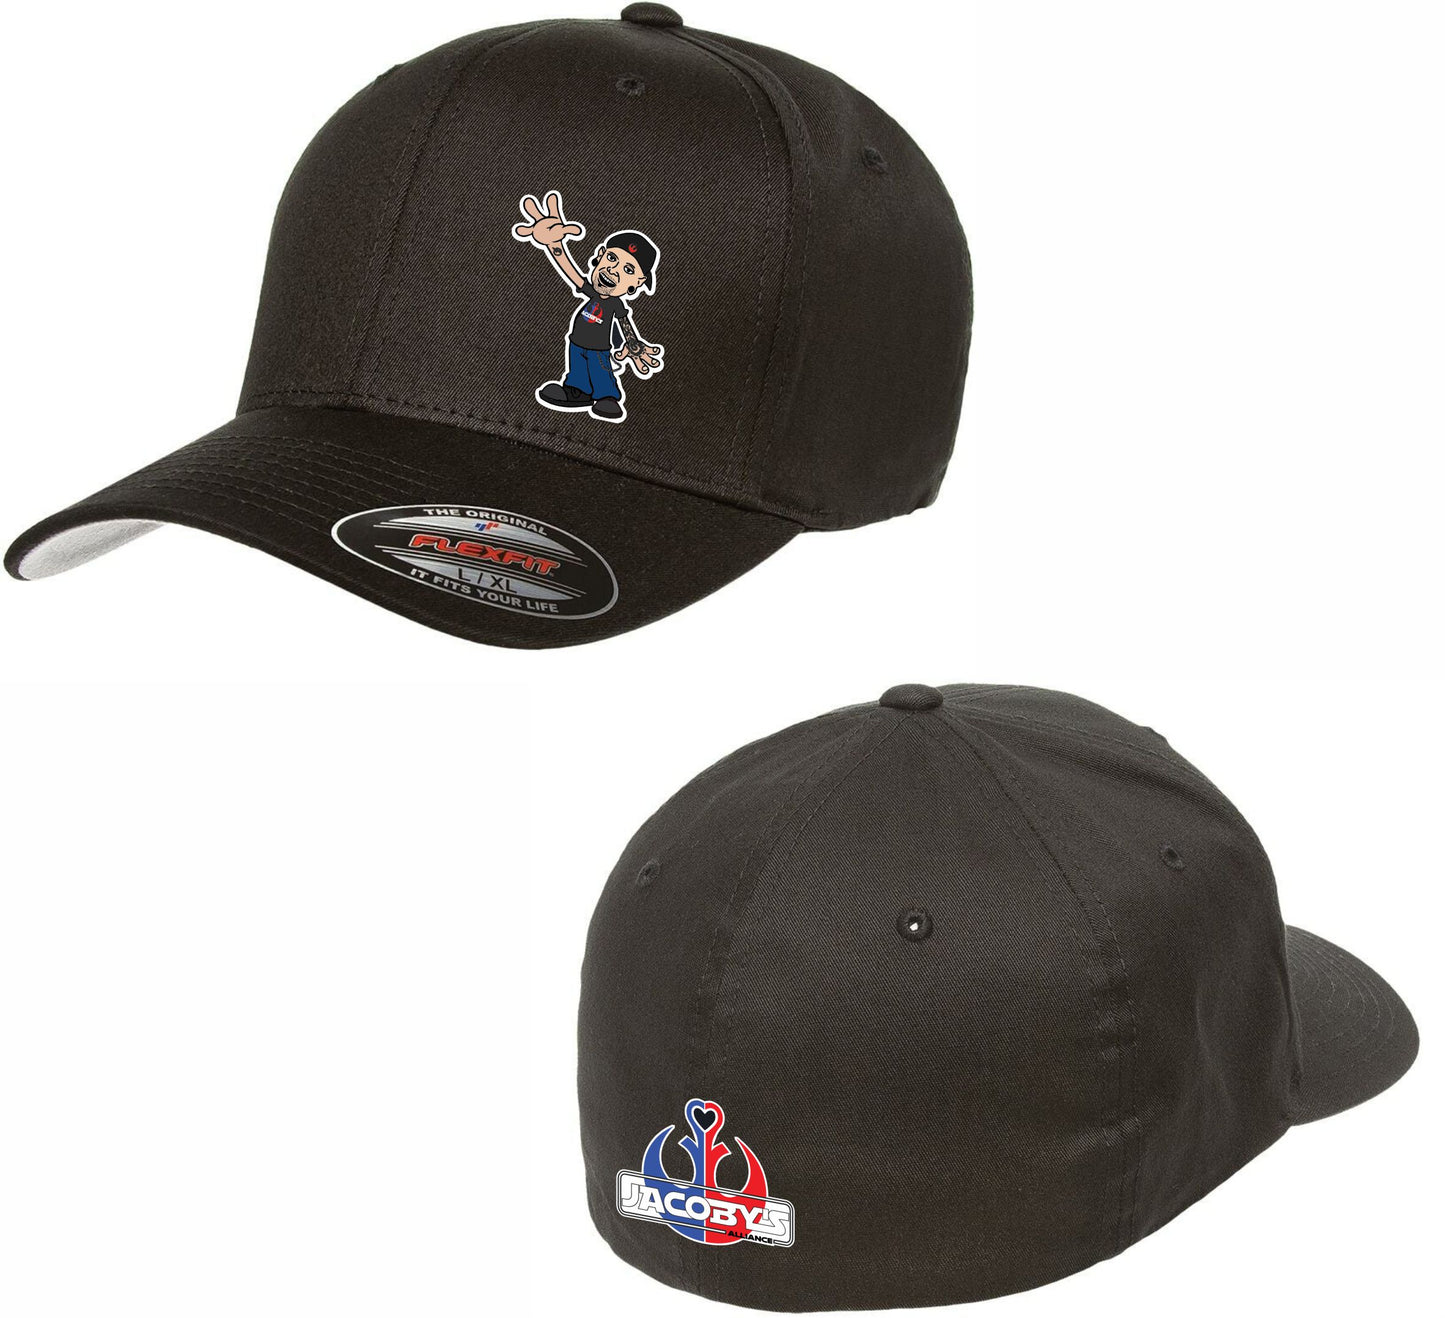 Hey Man/Jacoby's Alliance Combo Hat